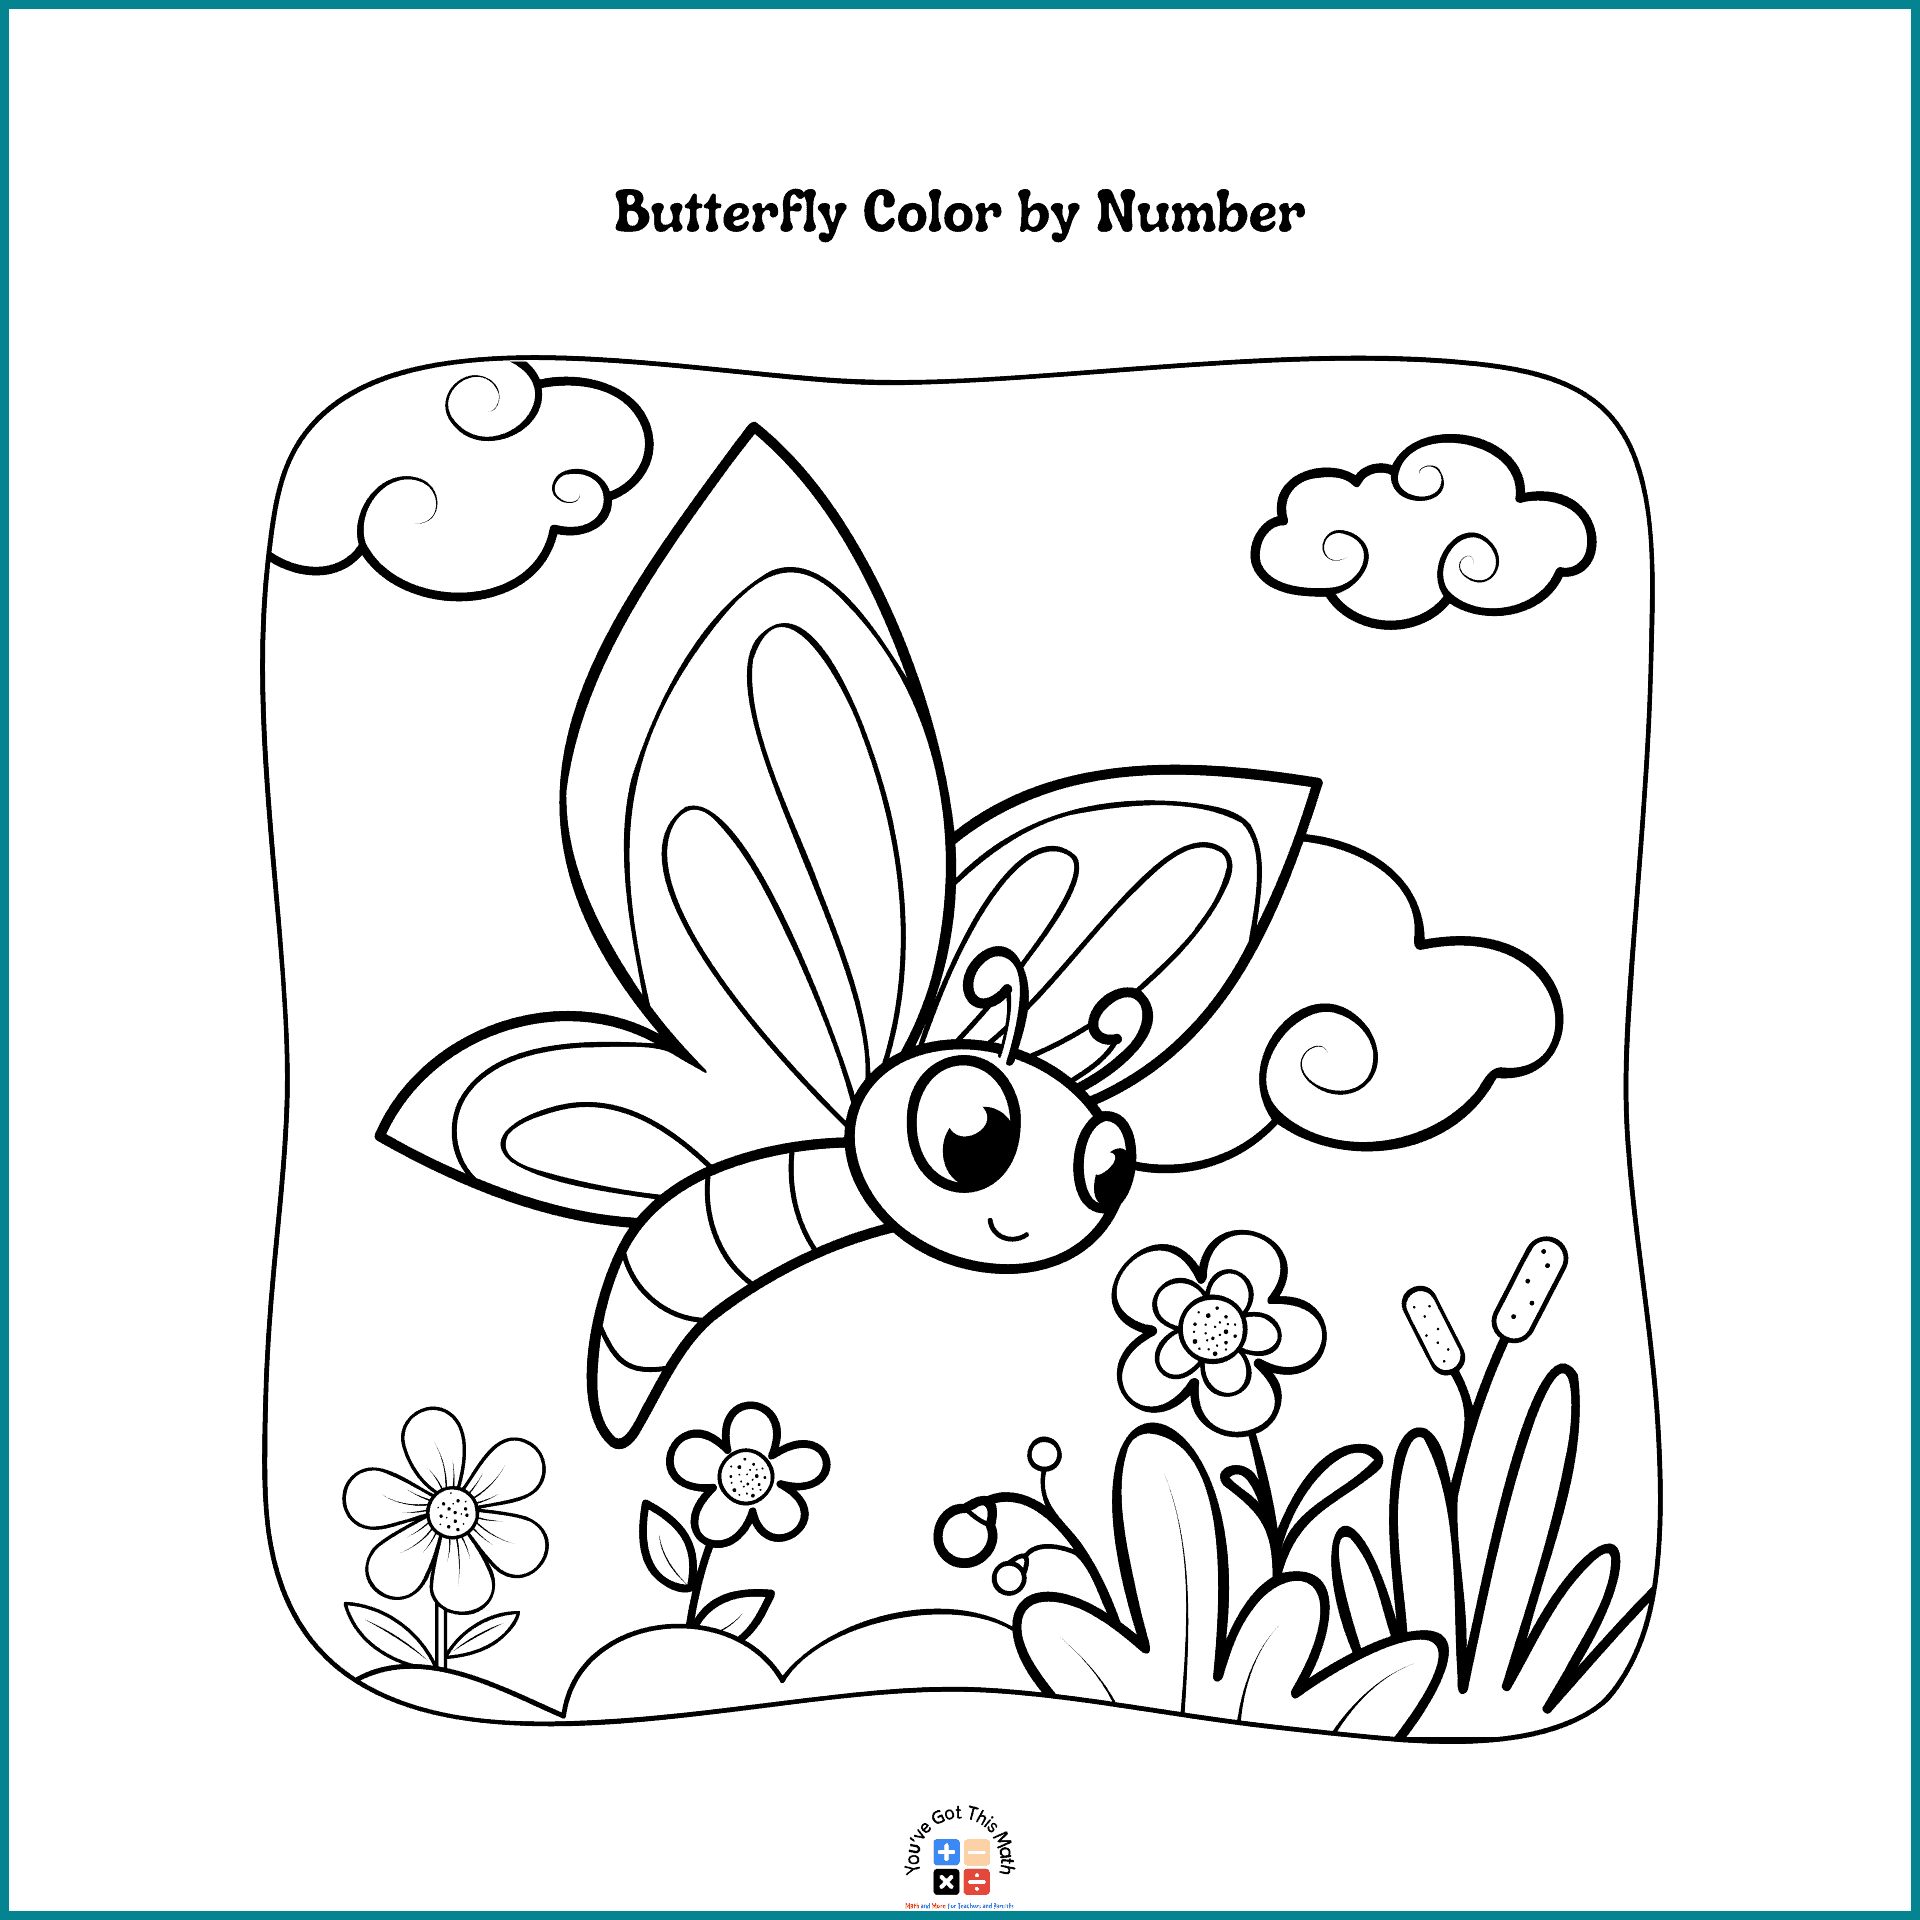 20 Fun Butterfly Coloring Pages | Free Printable